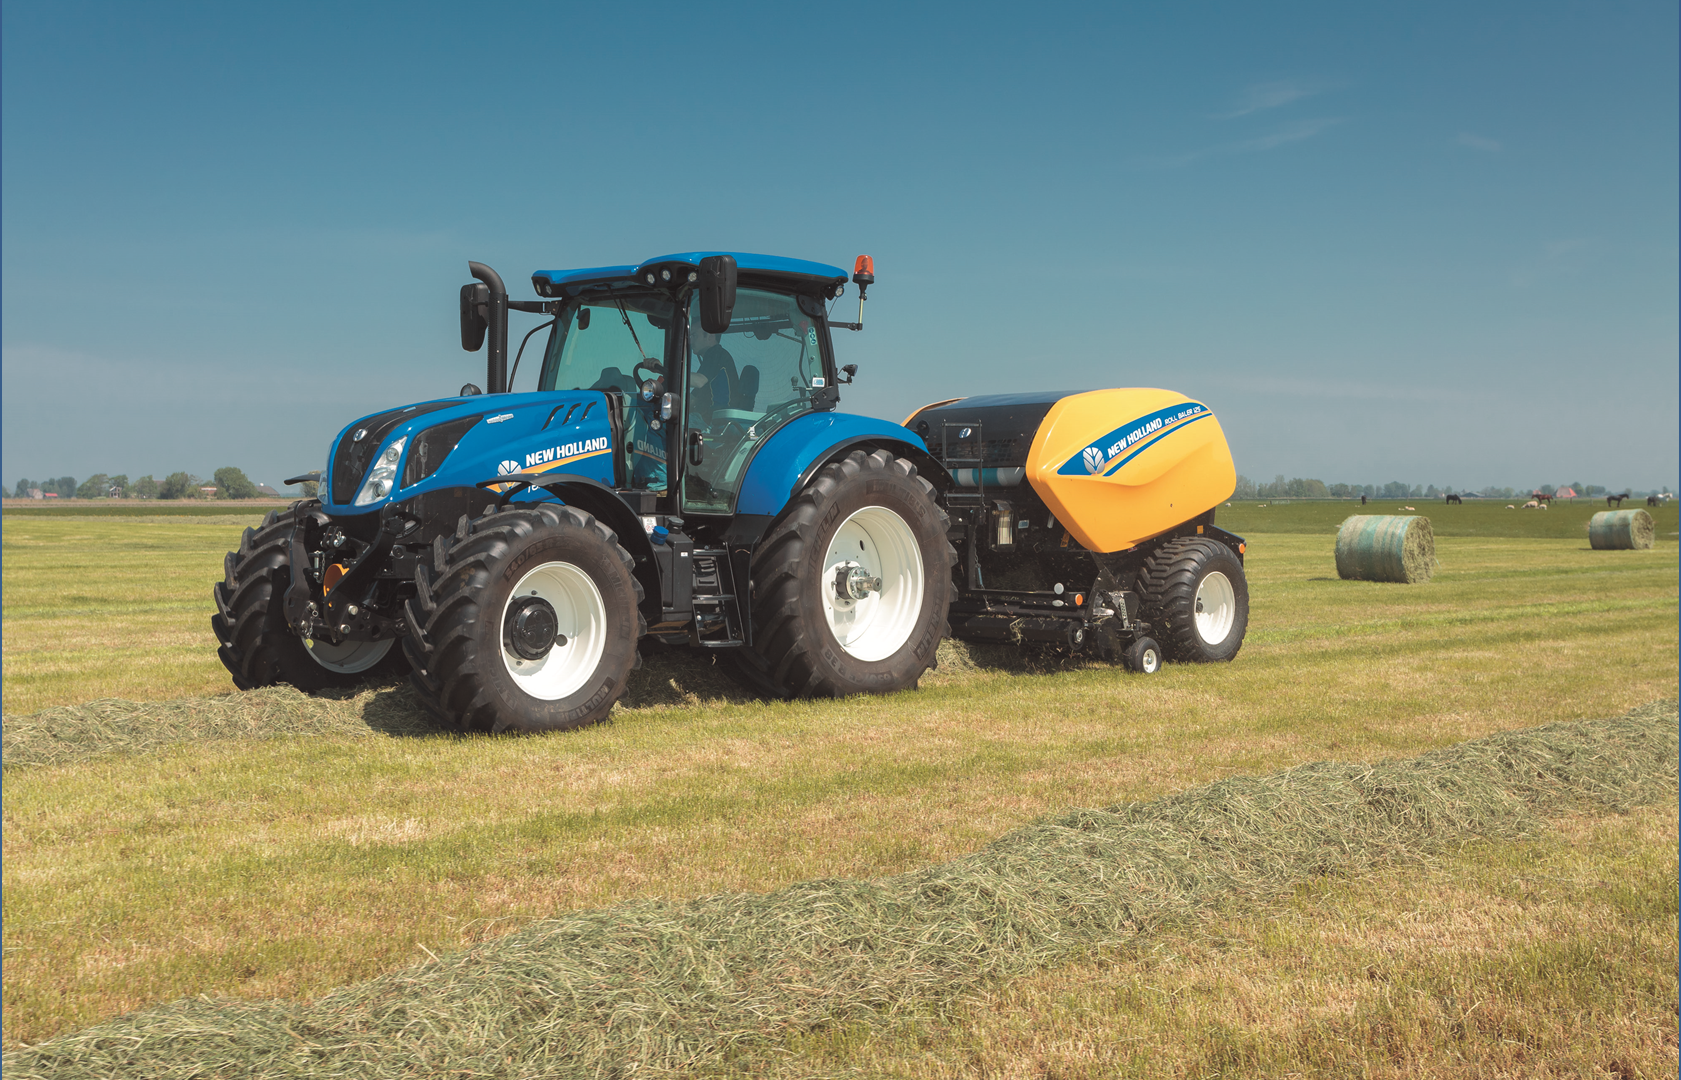 New Holland Agriculture launches the new Roll Baler 125 and Roll Baler 125 Combi